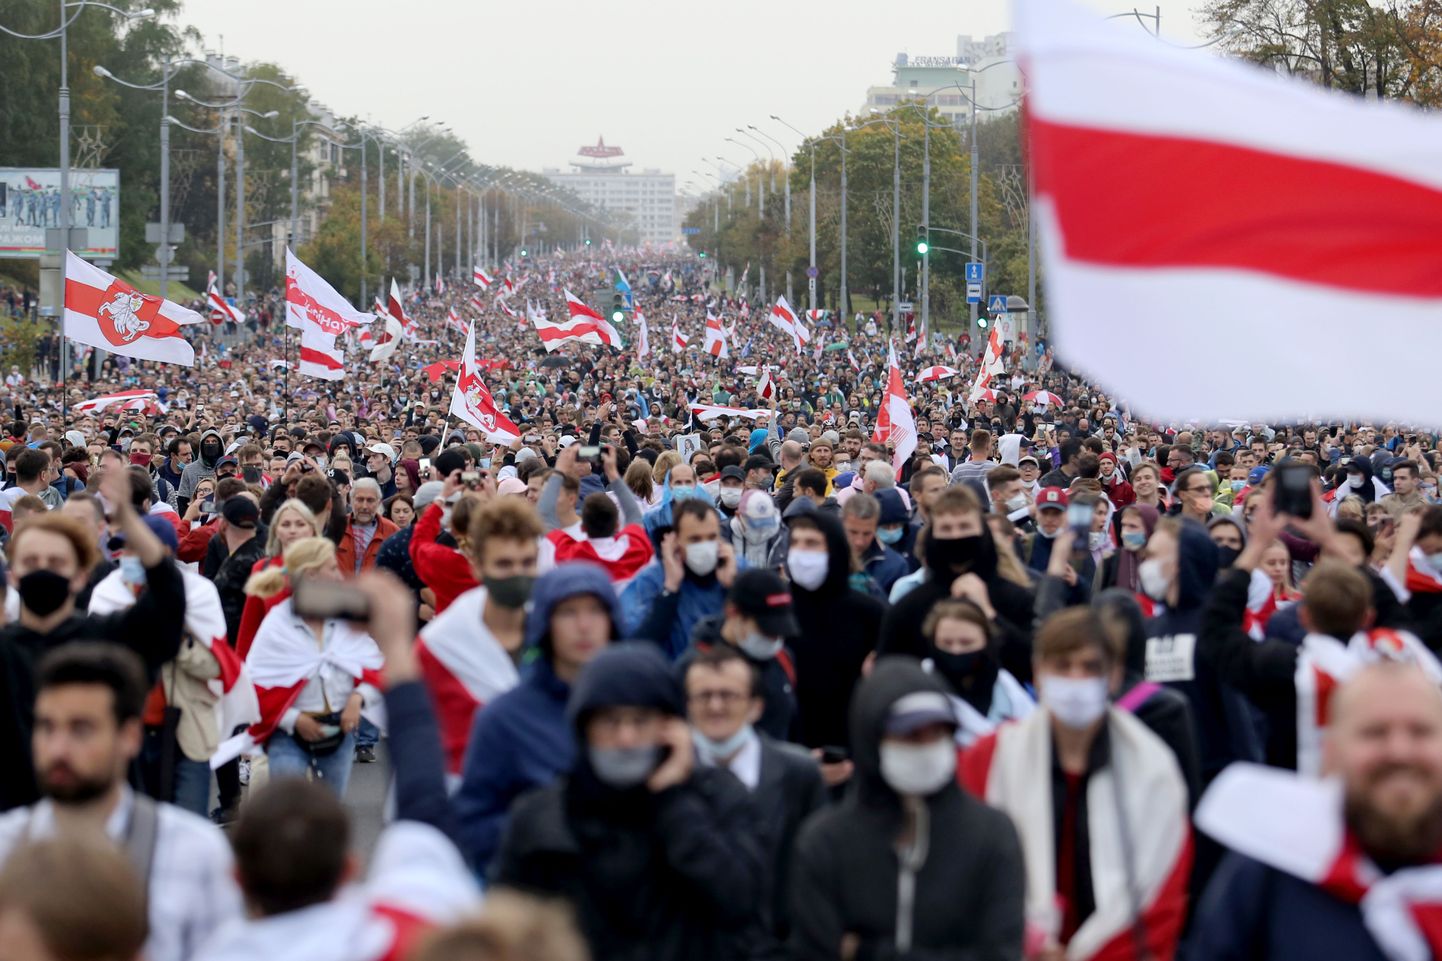 Opposition supporters carry the former white-red-white flag of Belarus as they march during a rally to protest the country's presidential inauguration in Minsk on September 27, 2020. - Belarus police on September 27 arrested dozens of people during an opposition march days after the strongman president staged a secret inauguration. The opposition movement calling for an end to the president authoritarian regime has kept up a wave of large-scale demonstrations every Sunday since his disputed win of an August 9 election. (Photo by - / TUT.BY / AFP)